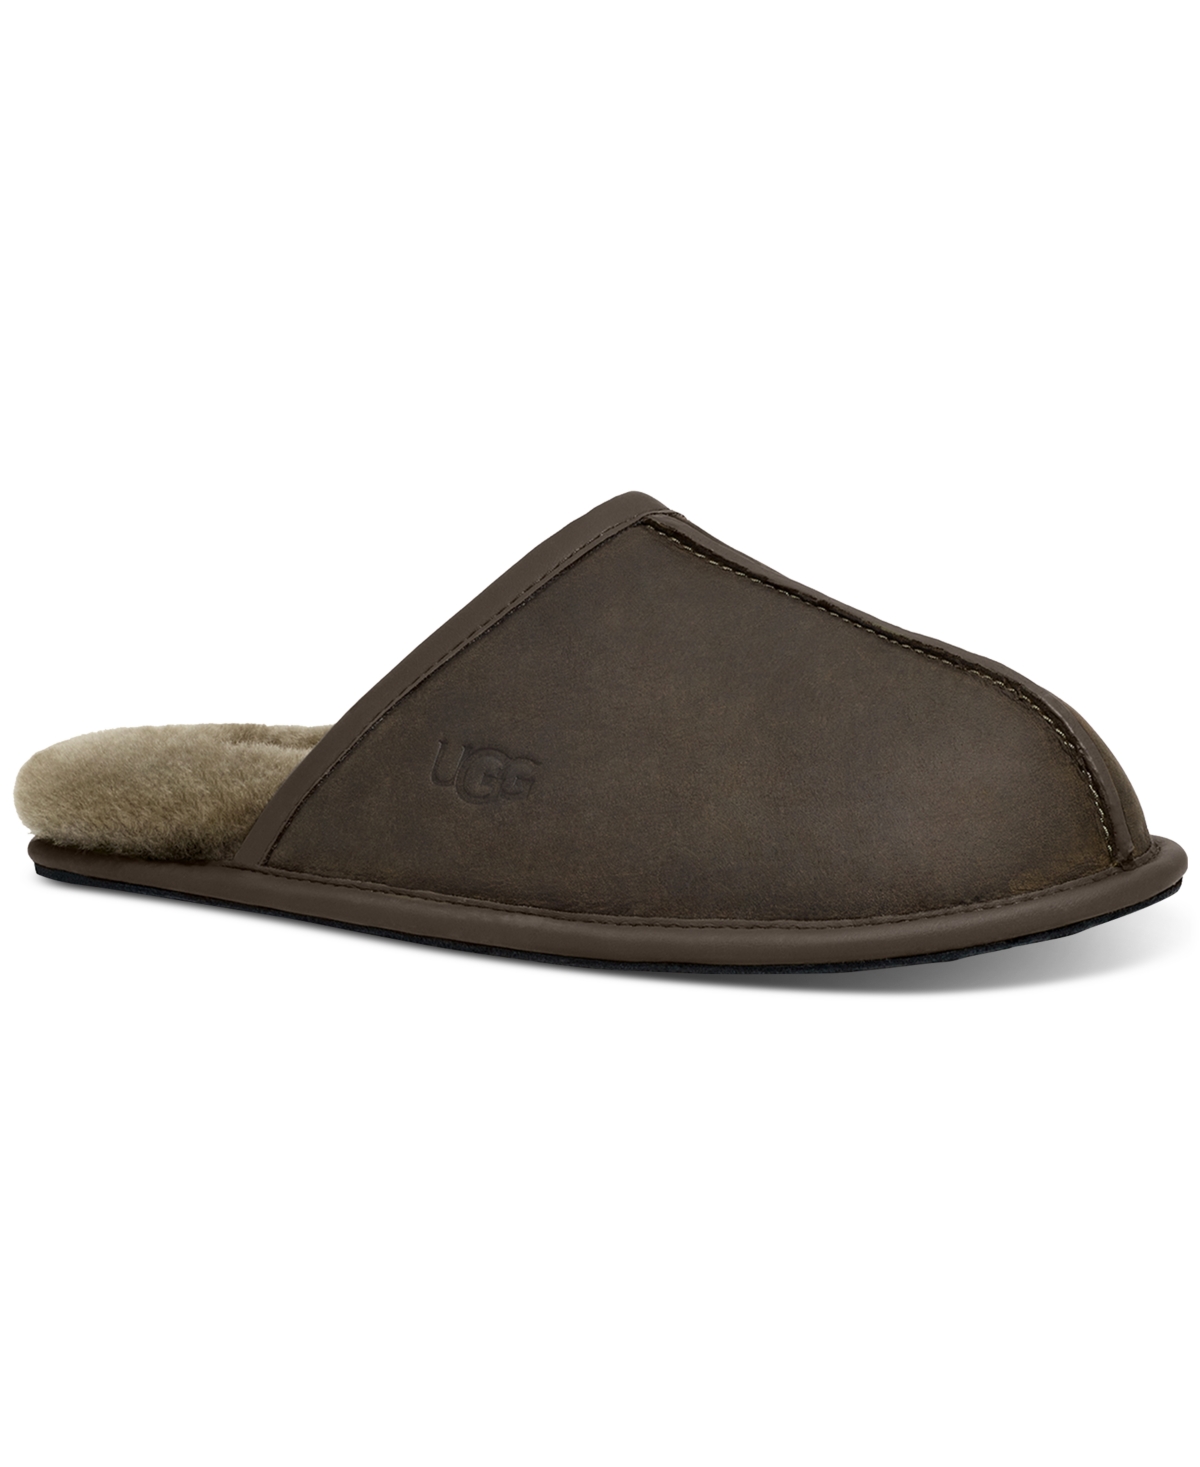 UGG MEN'S SCUFF LEATHER LOAFERS